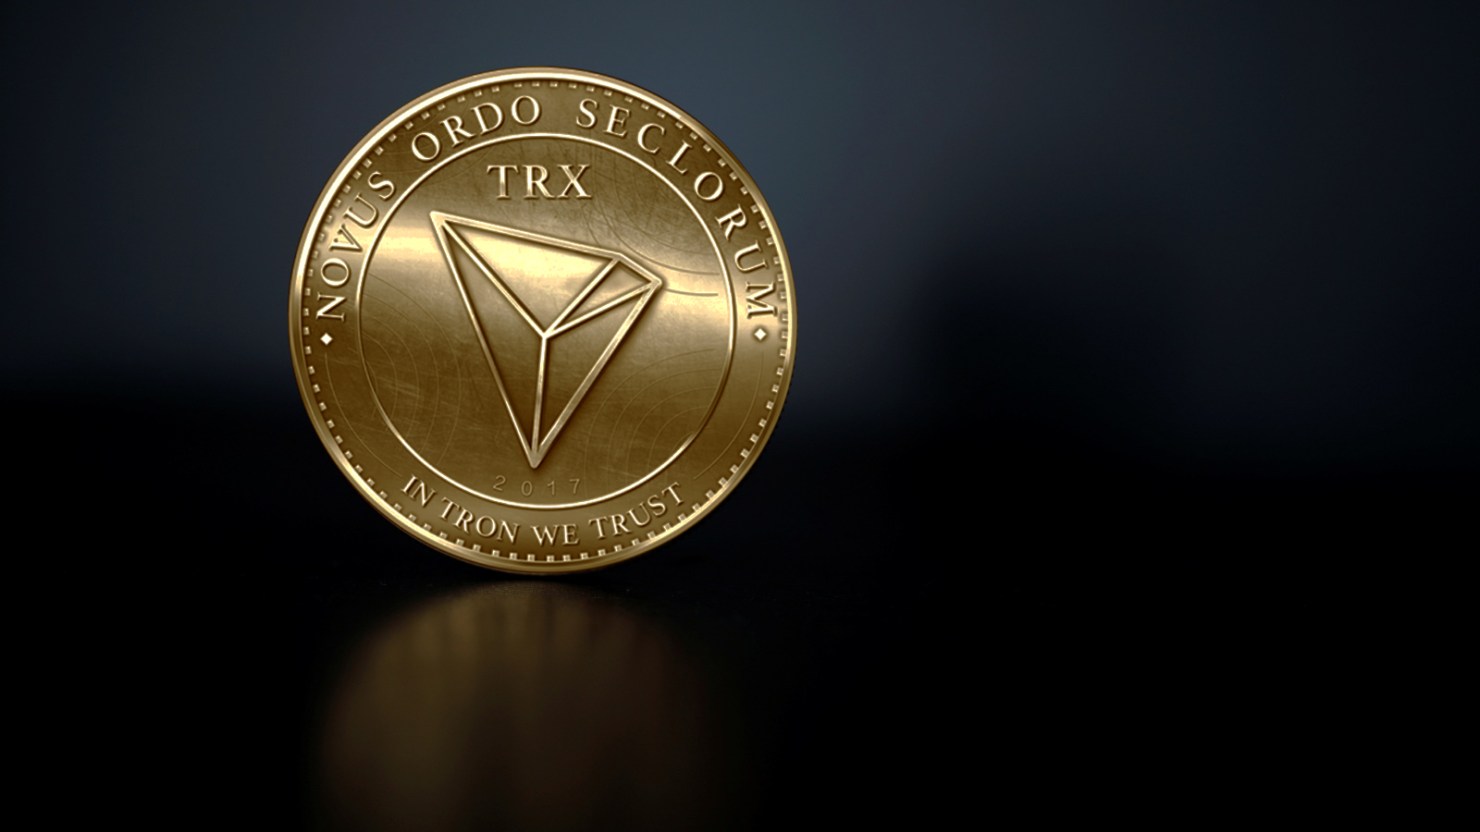  tron 741 trx day transaction increased awesomeness 